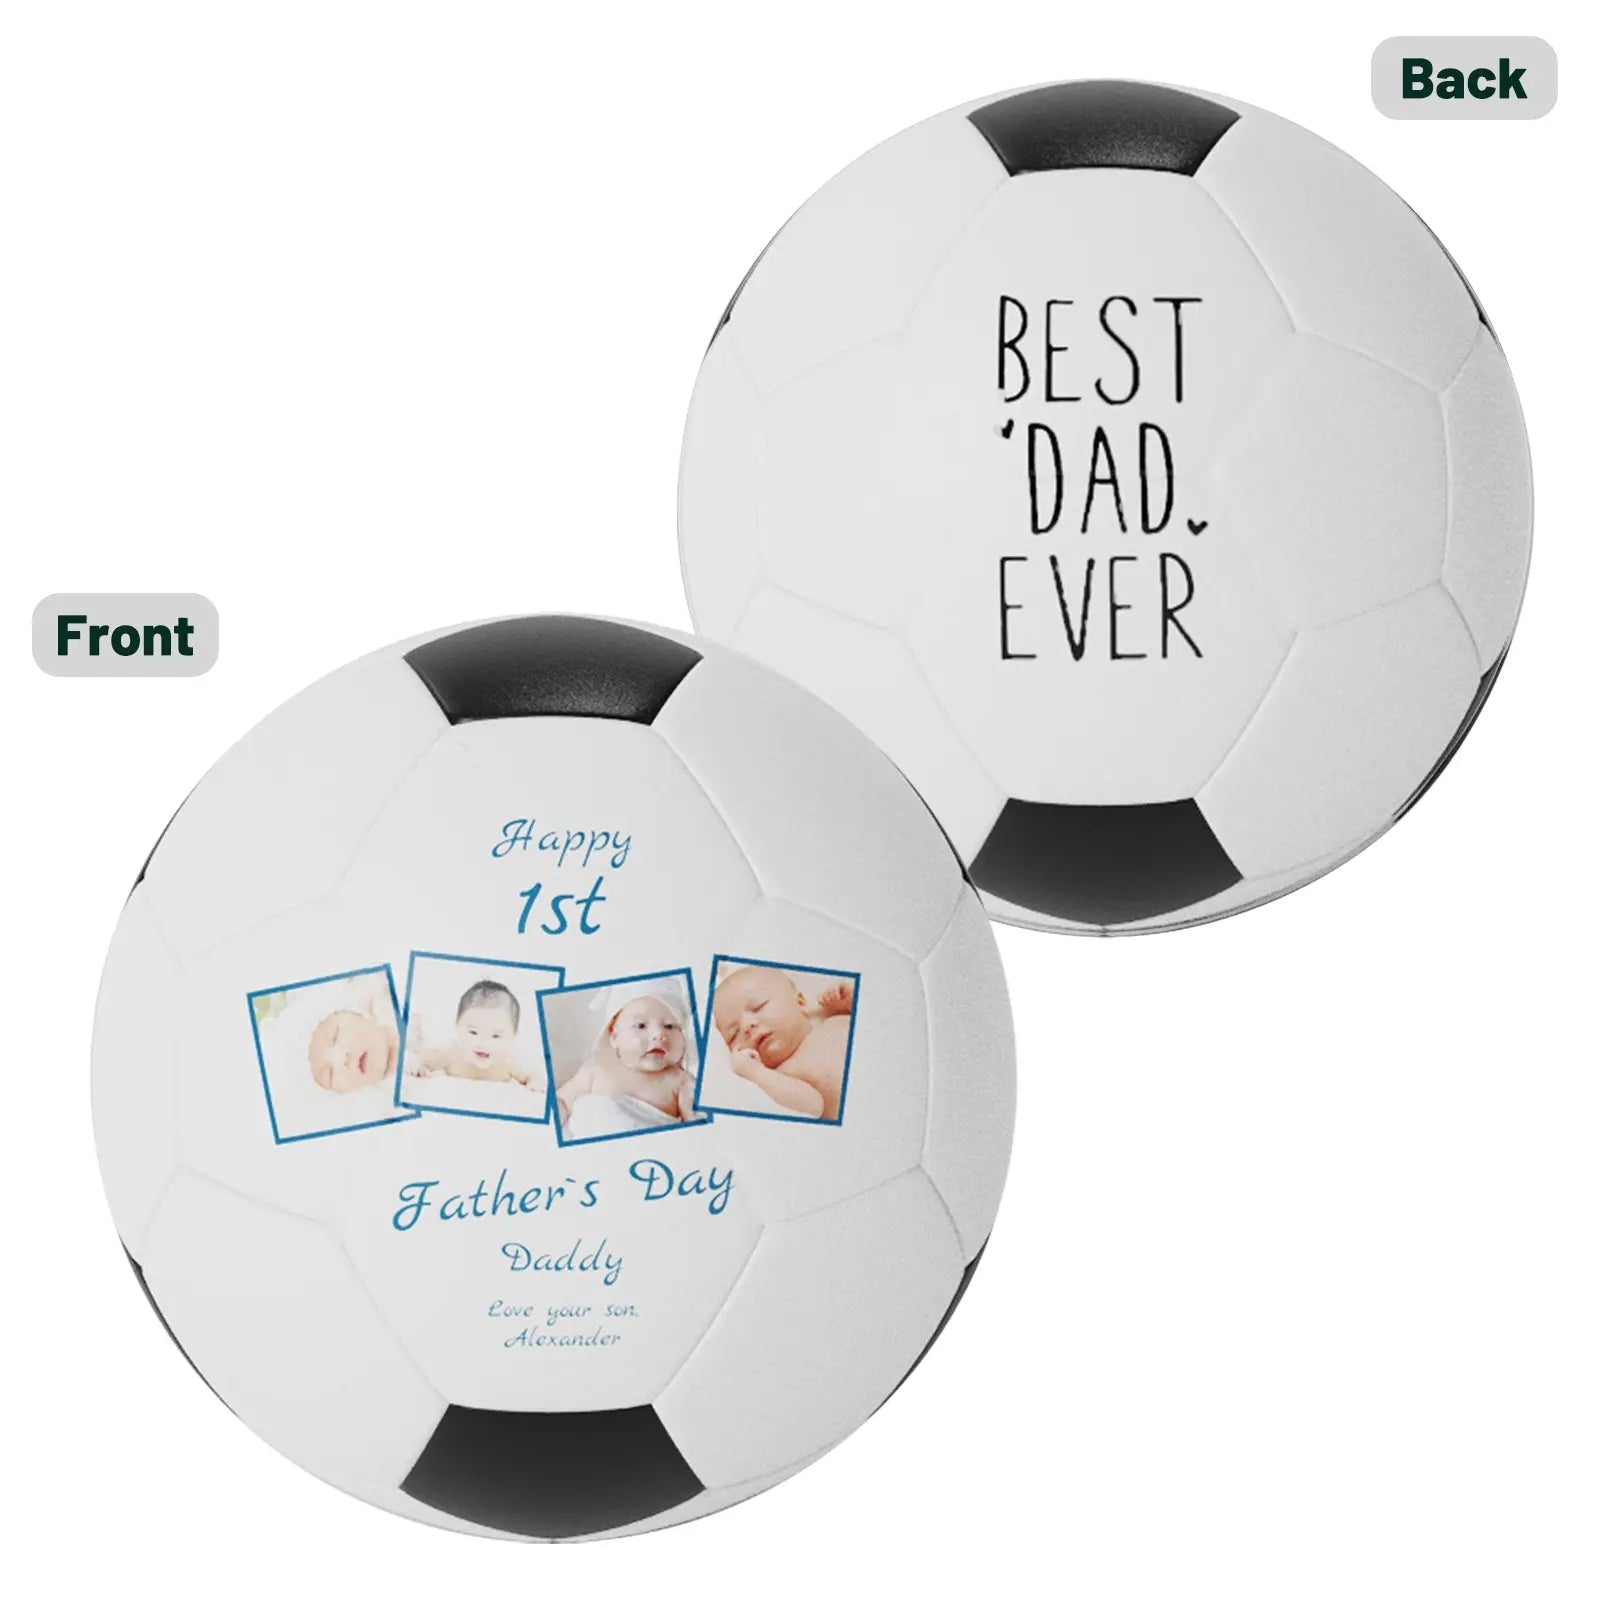 Best Dad Father's Day Photo Gifts Soccer Ball - Family Watchs